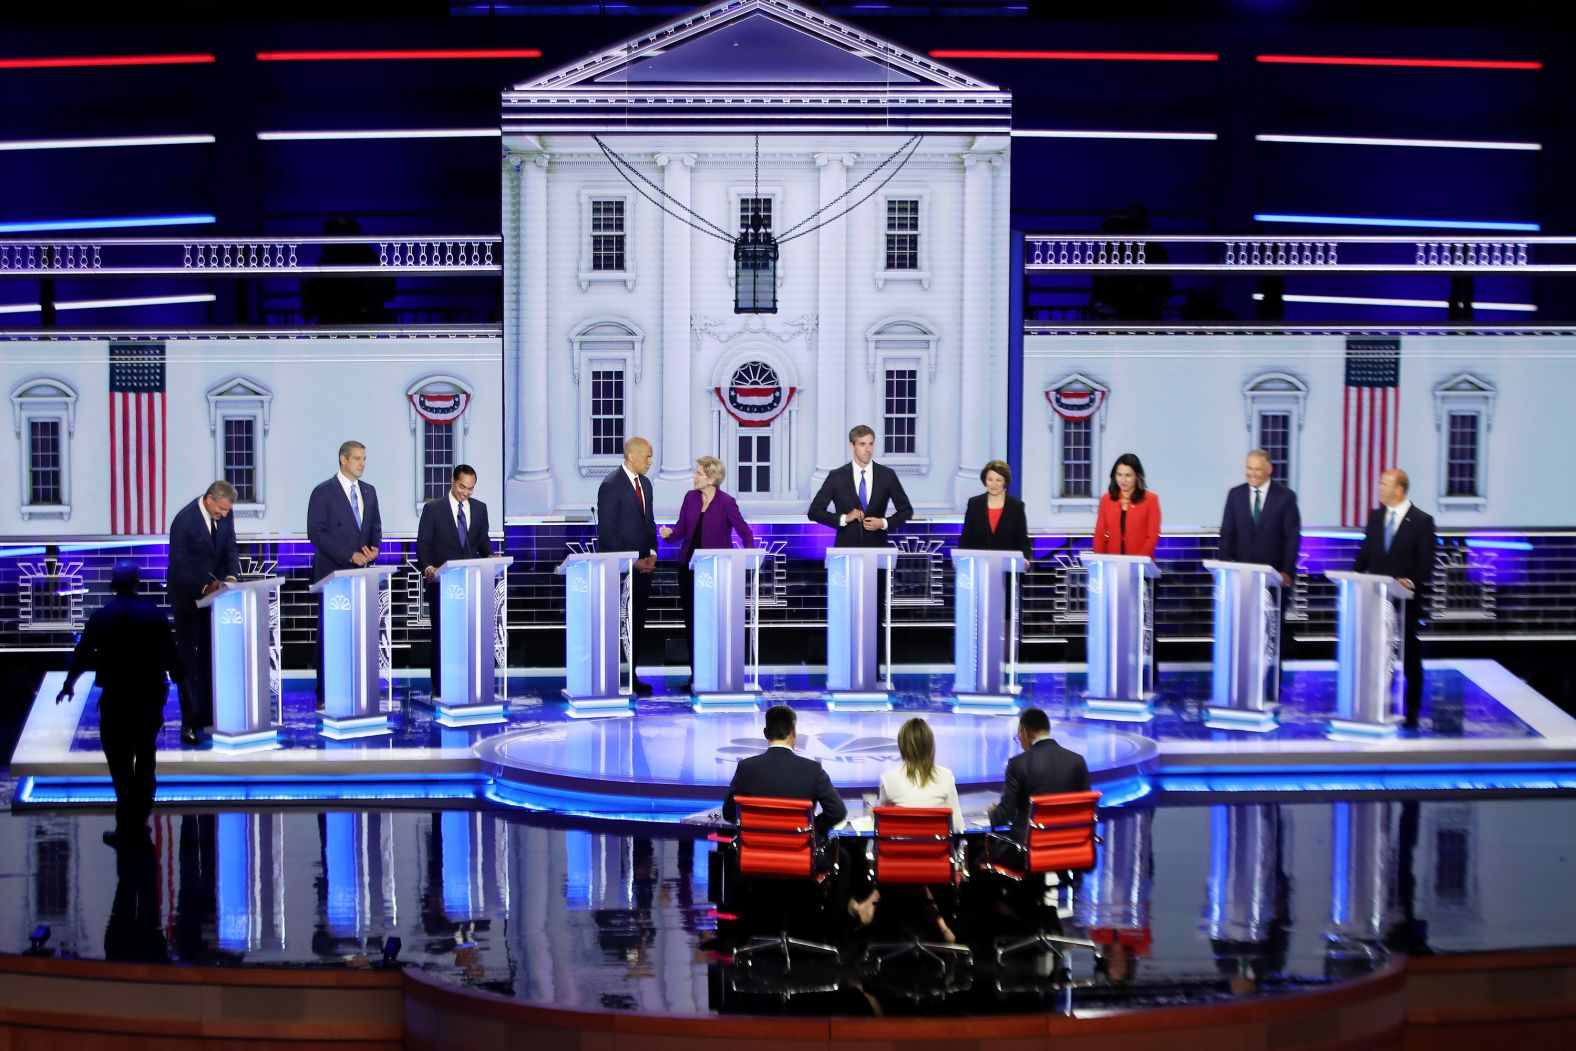 The candidates prepare for the start of Wednesday's debate.